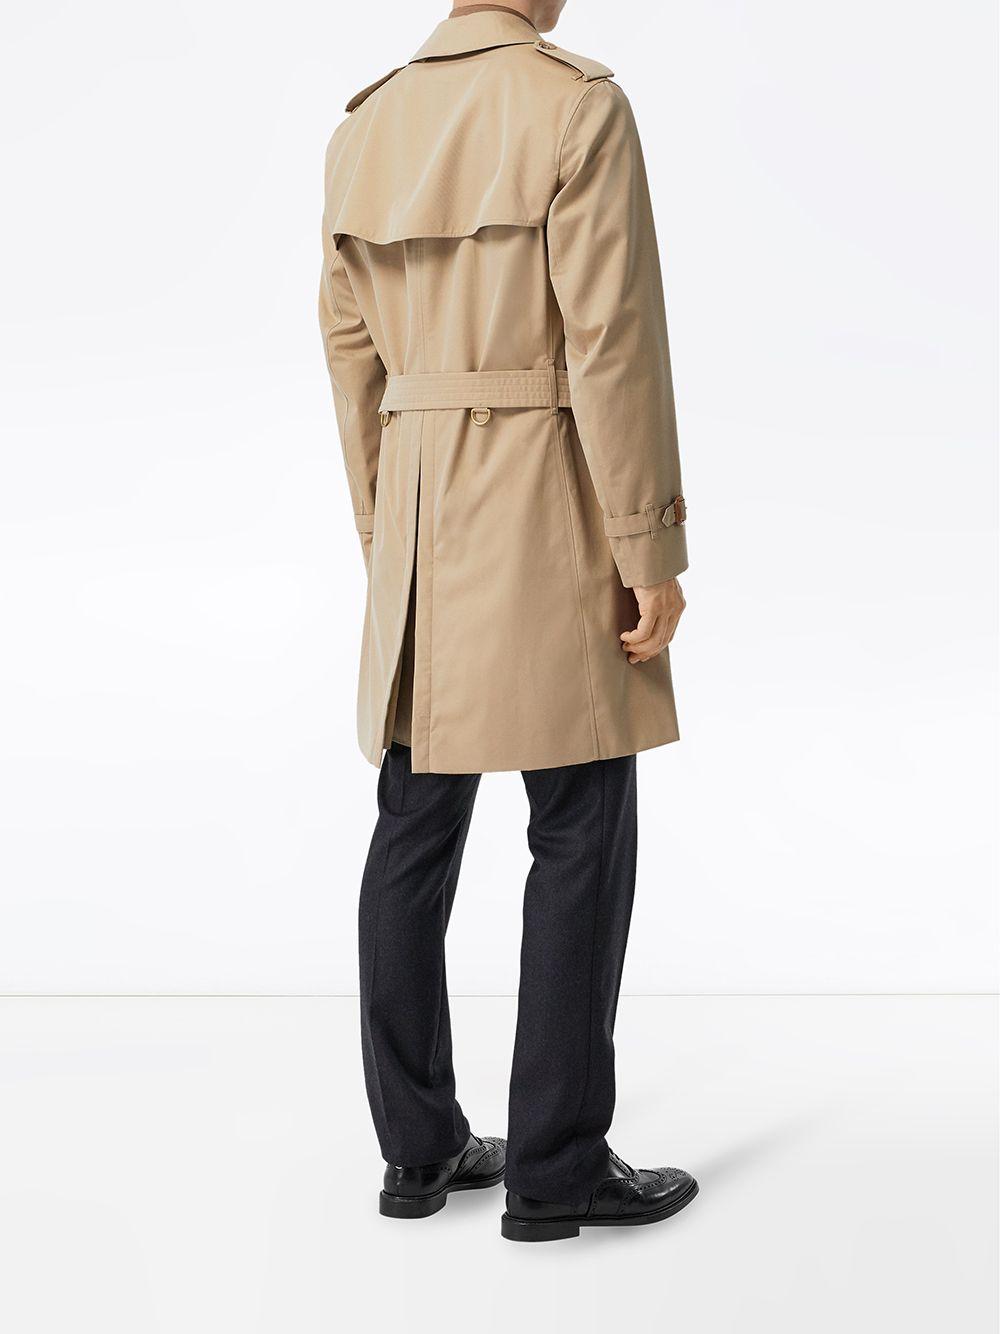 Burberry Chelsea Heritage Midi Trench Coat in Natural for Men - Lyst